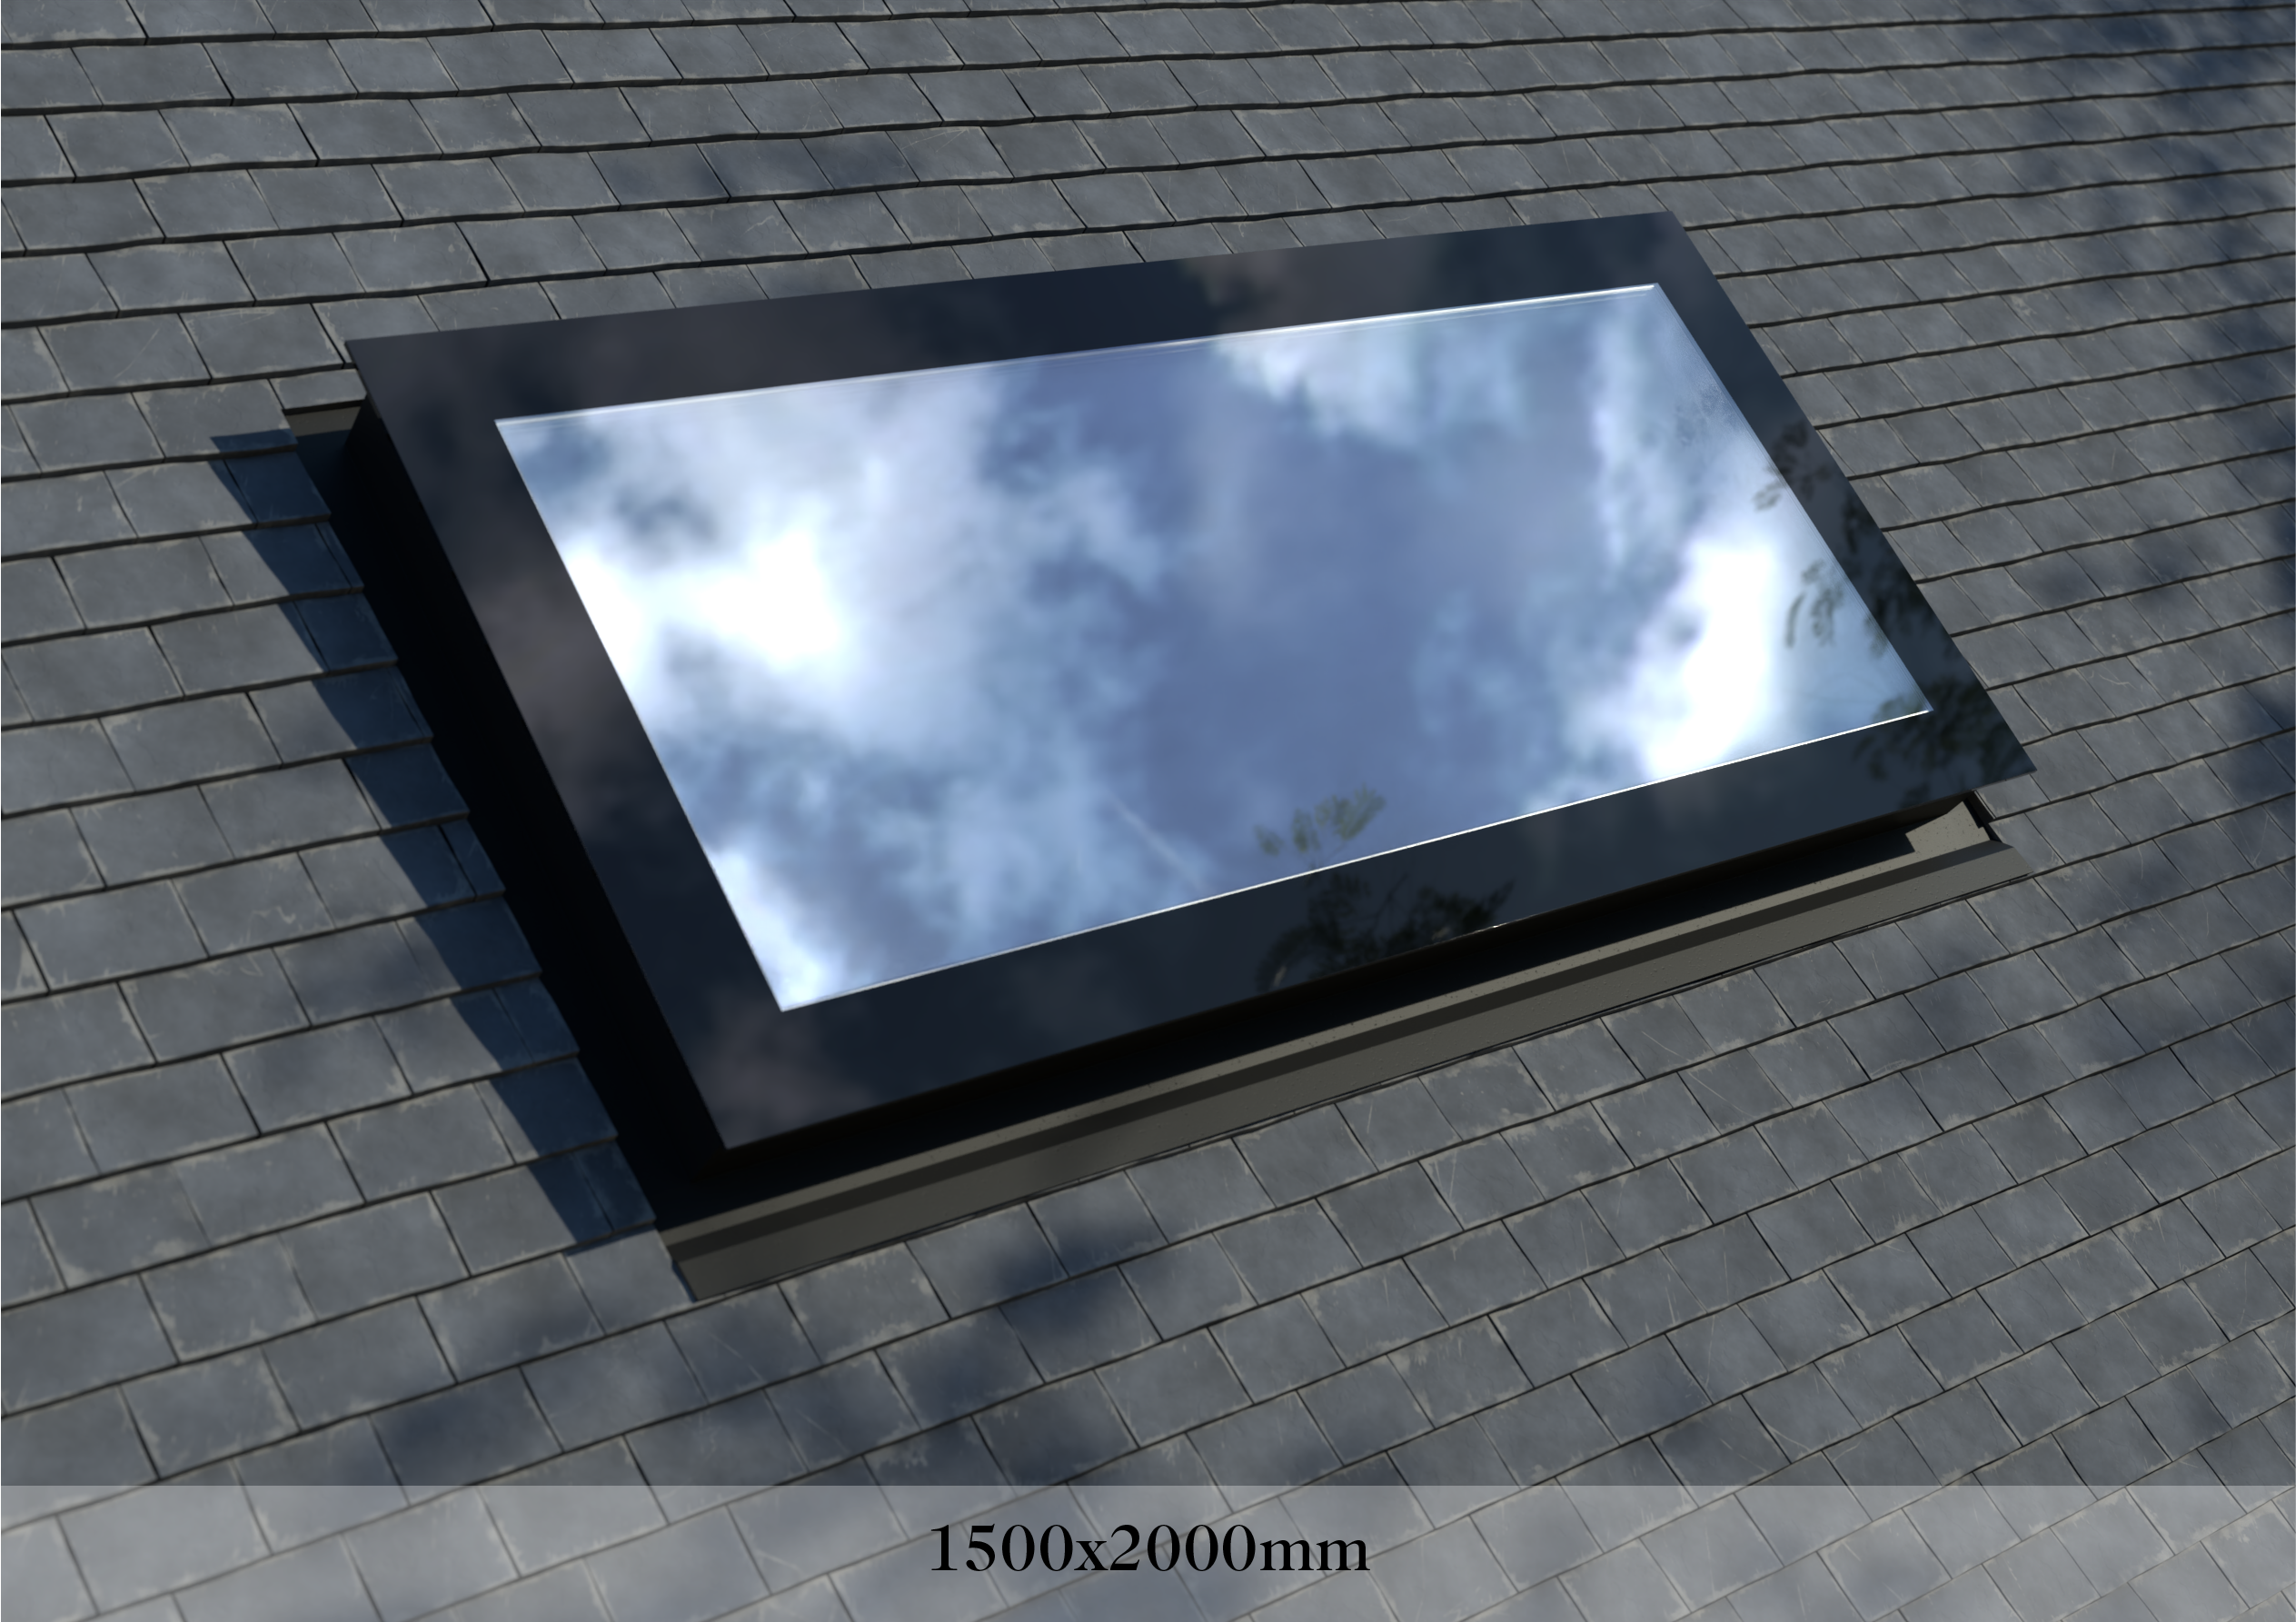 Pitched Roof Skylight 1500 x 2000mm